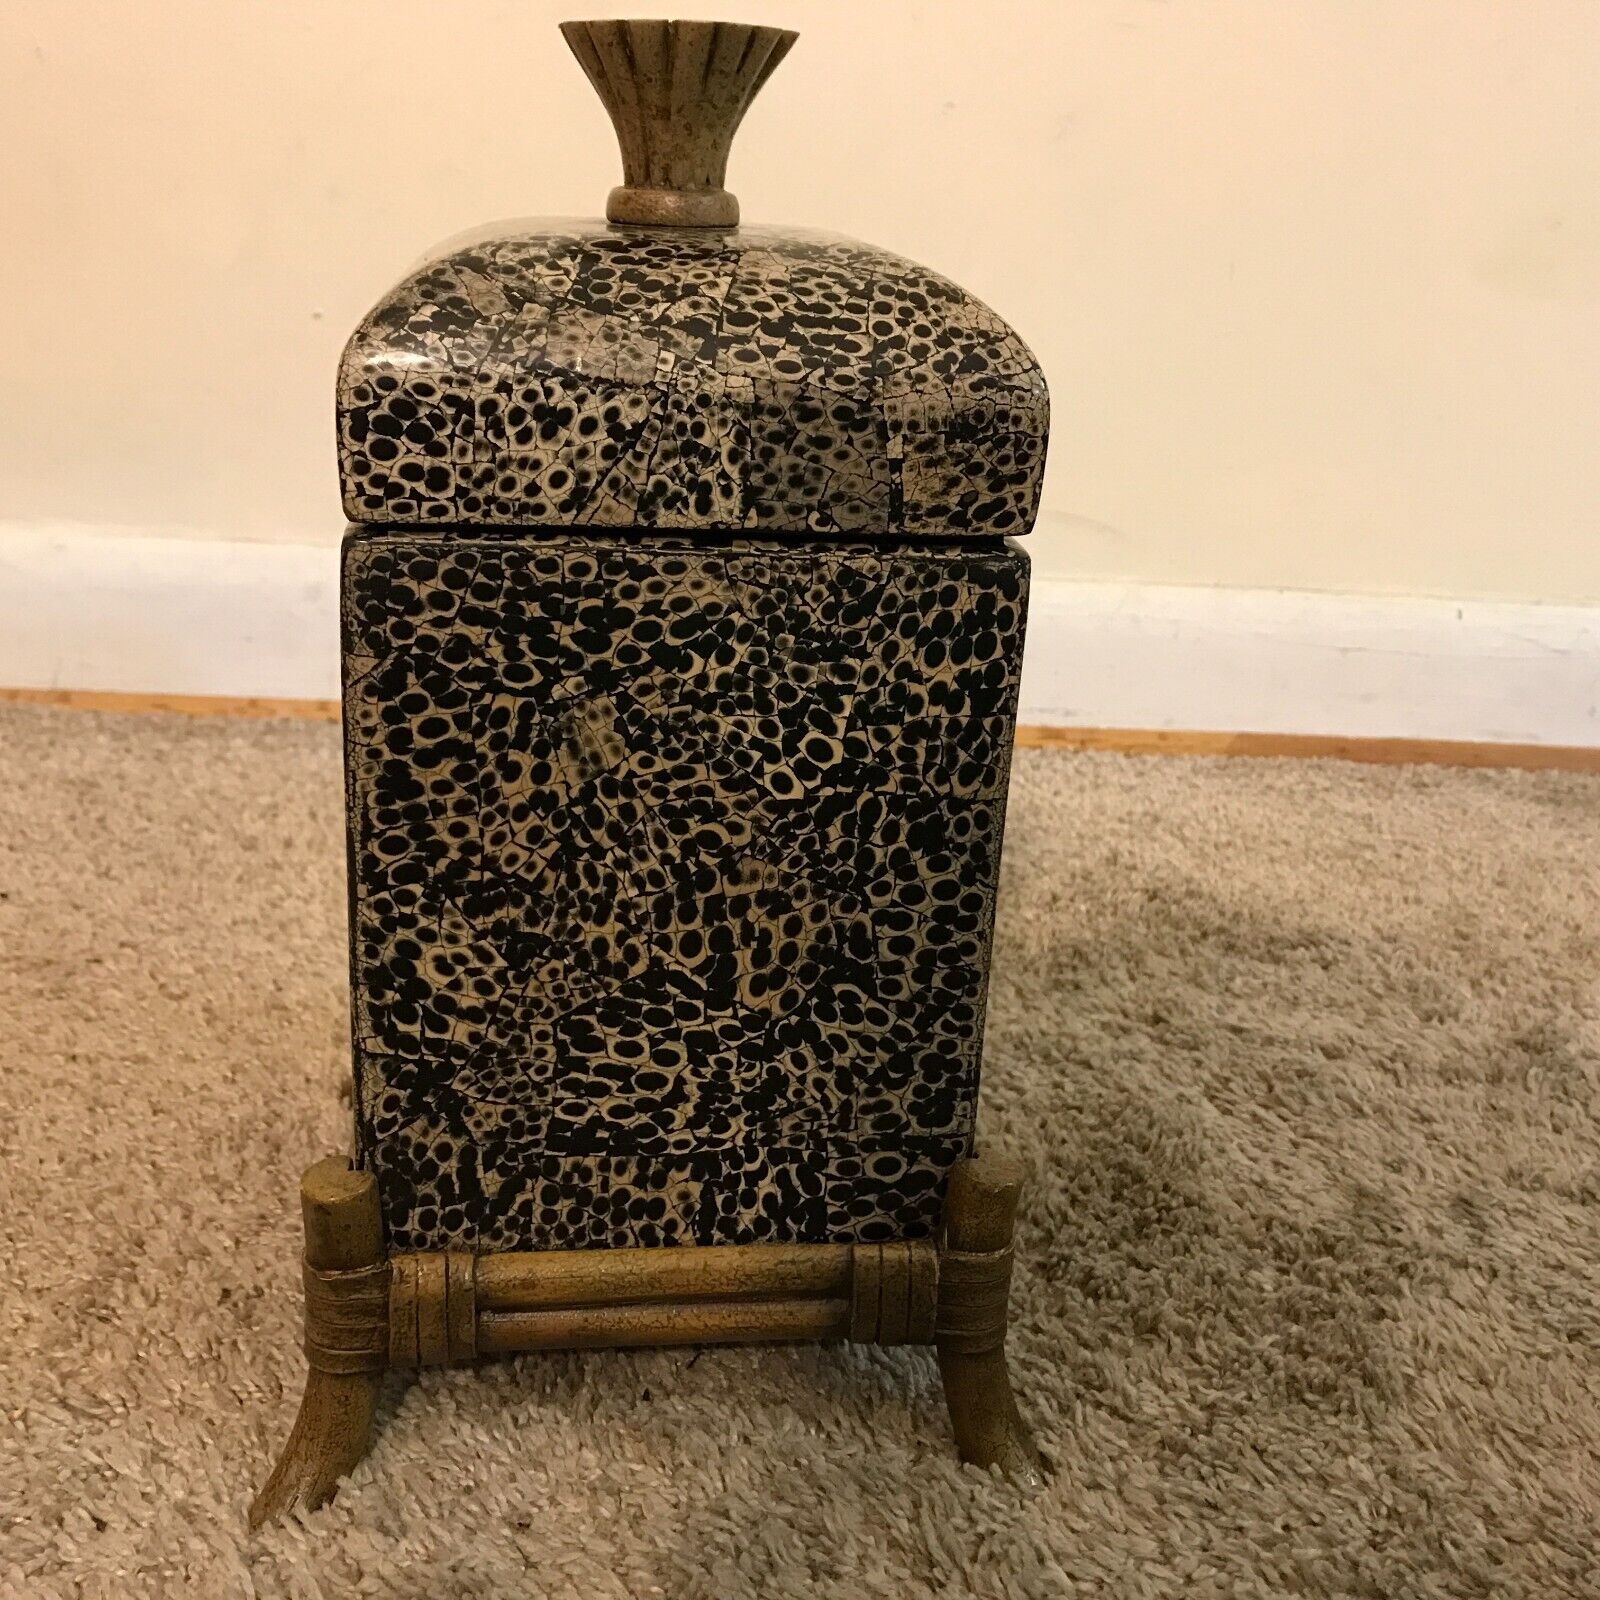 Maitland Smith Spotted Cheetah / Leopard Print Wooden Box on Stand